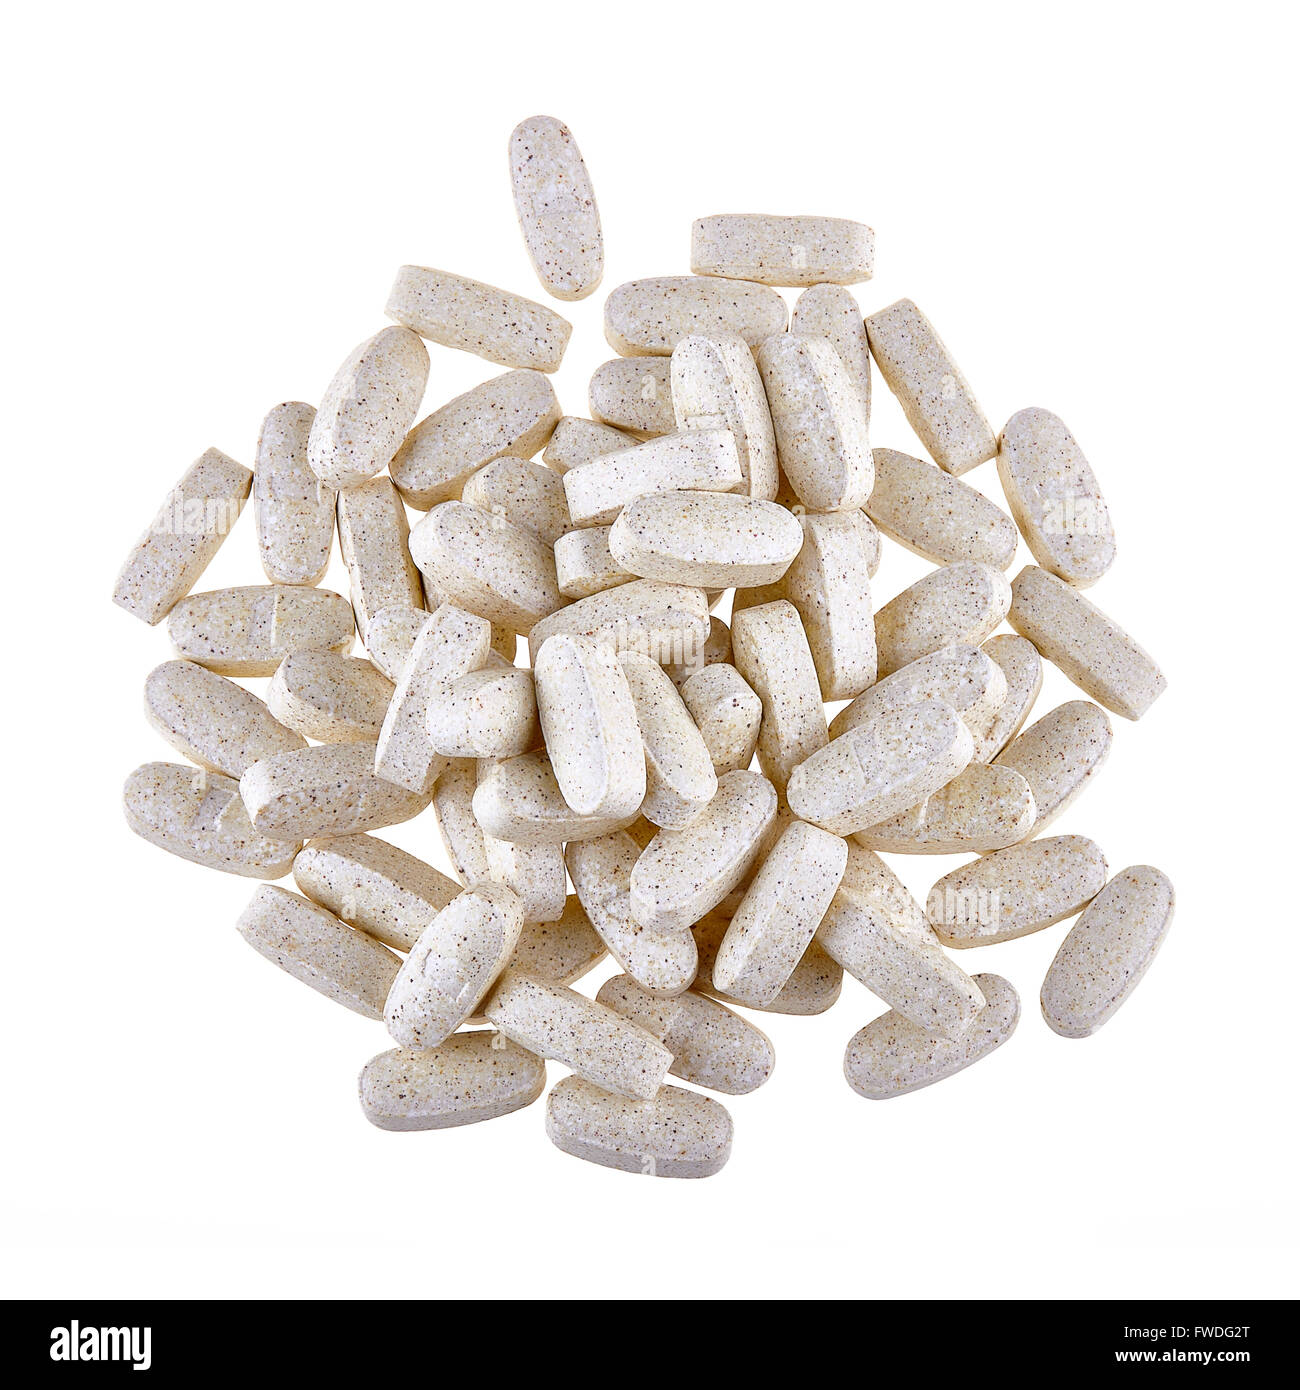 Heap of nutritional supplement pills isolated on white Stock Photo